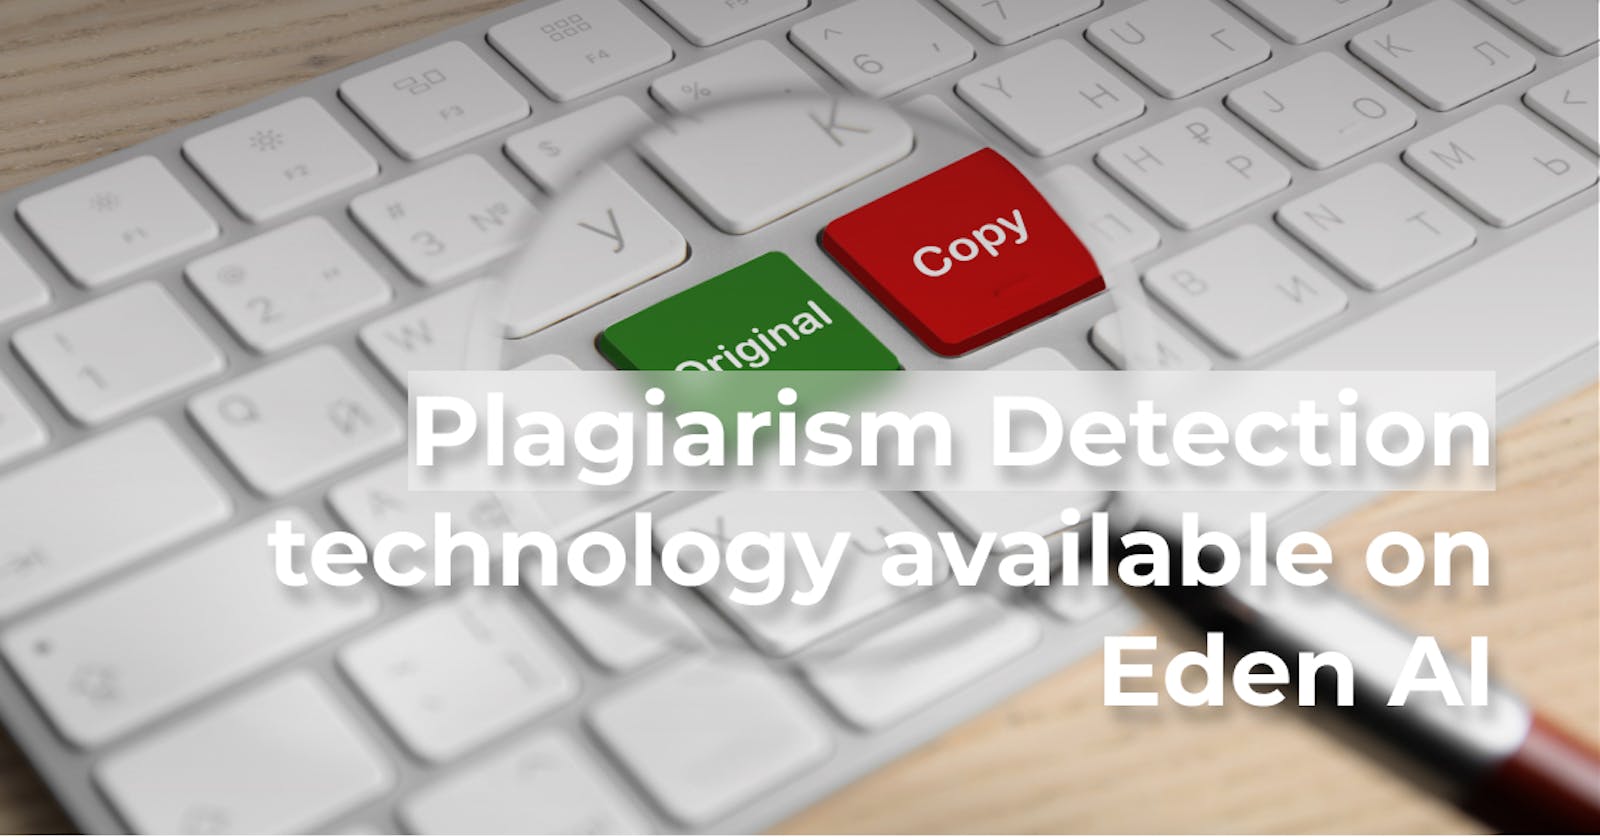 NEW: Plagiarism Detection available on Eden AI